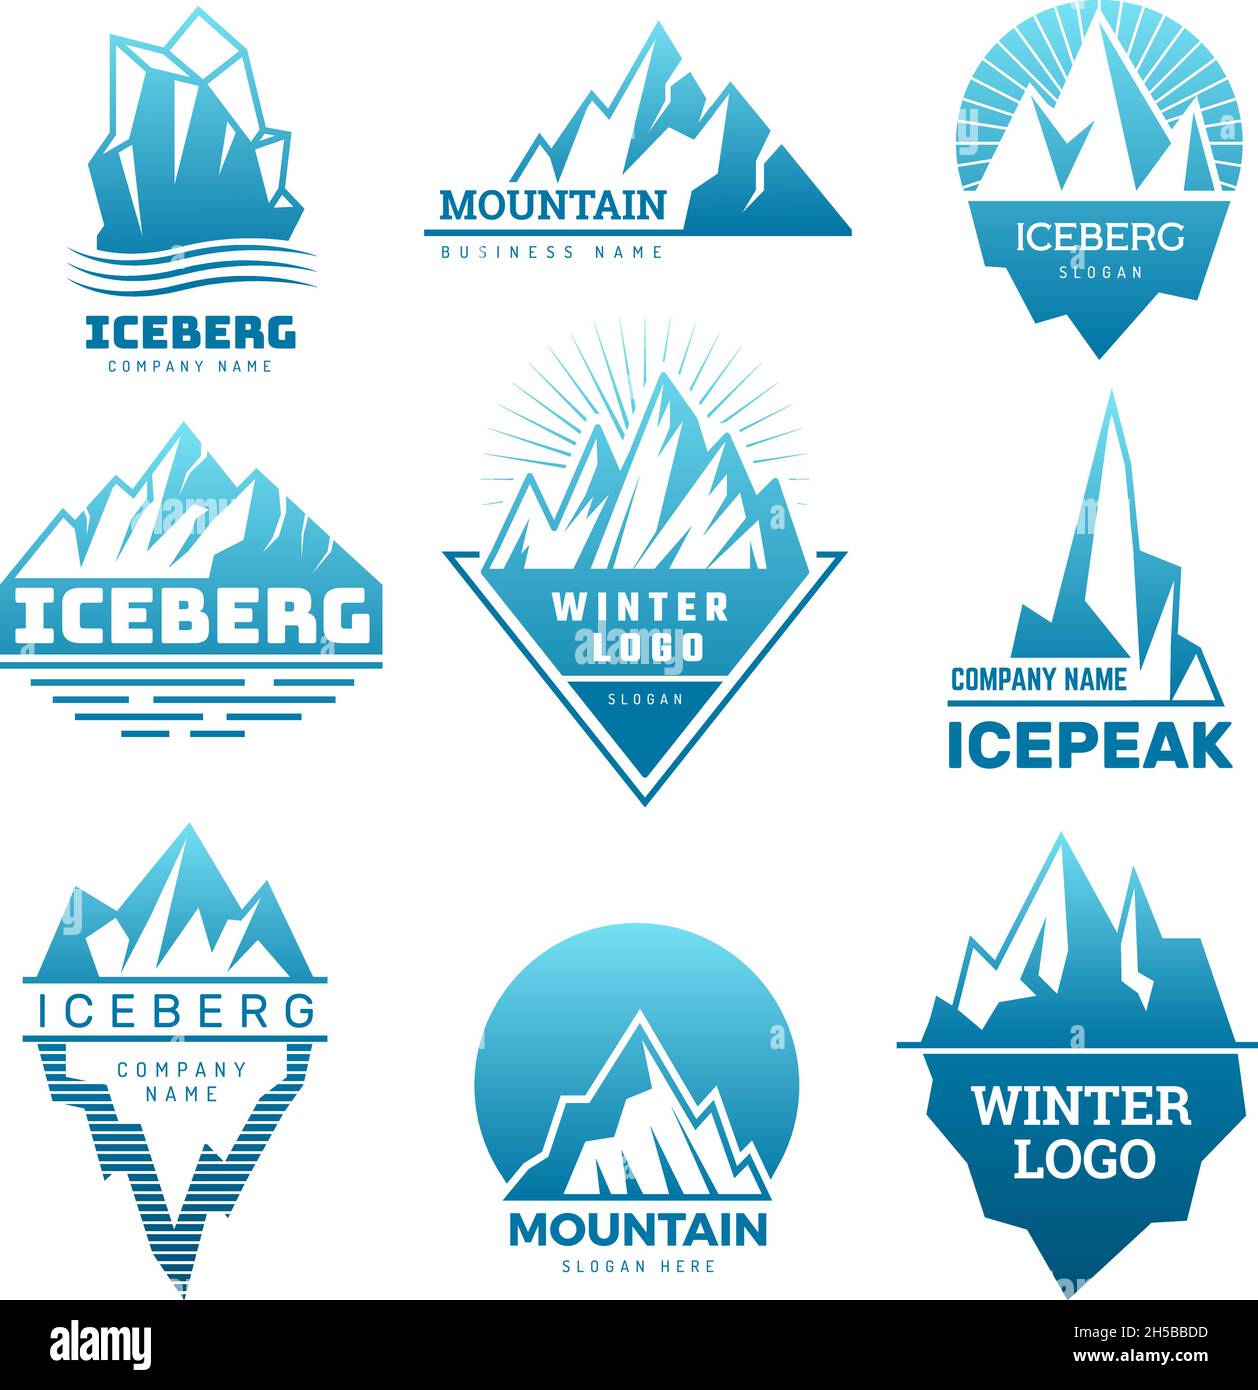 Mountain logo. Badges with ice rock pictures iceberg on north pole antarctic snow weather stylized recent vector business symbols Stock Vector